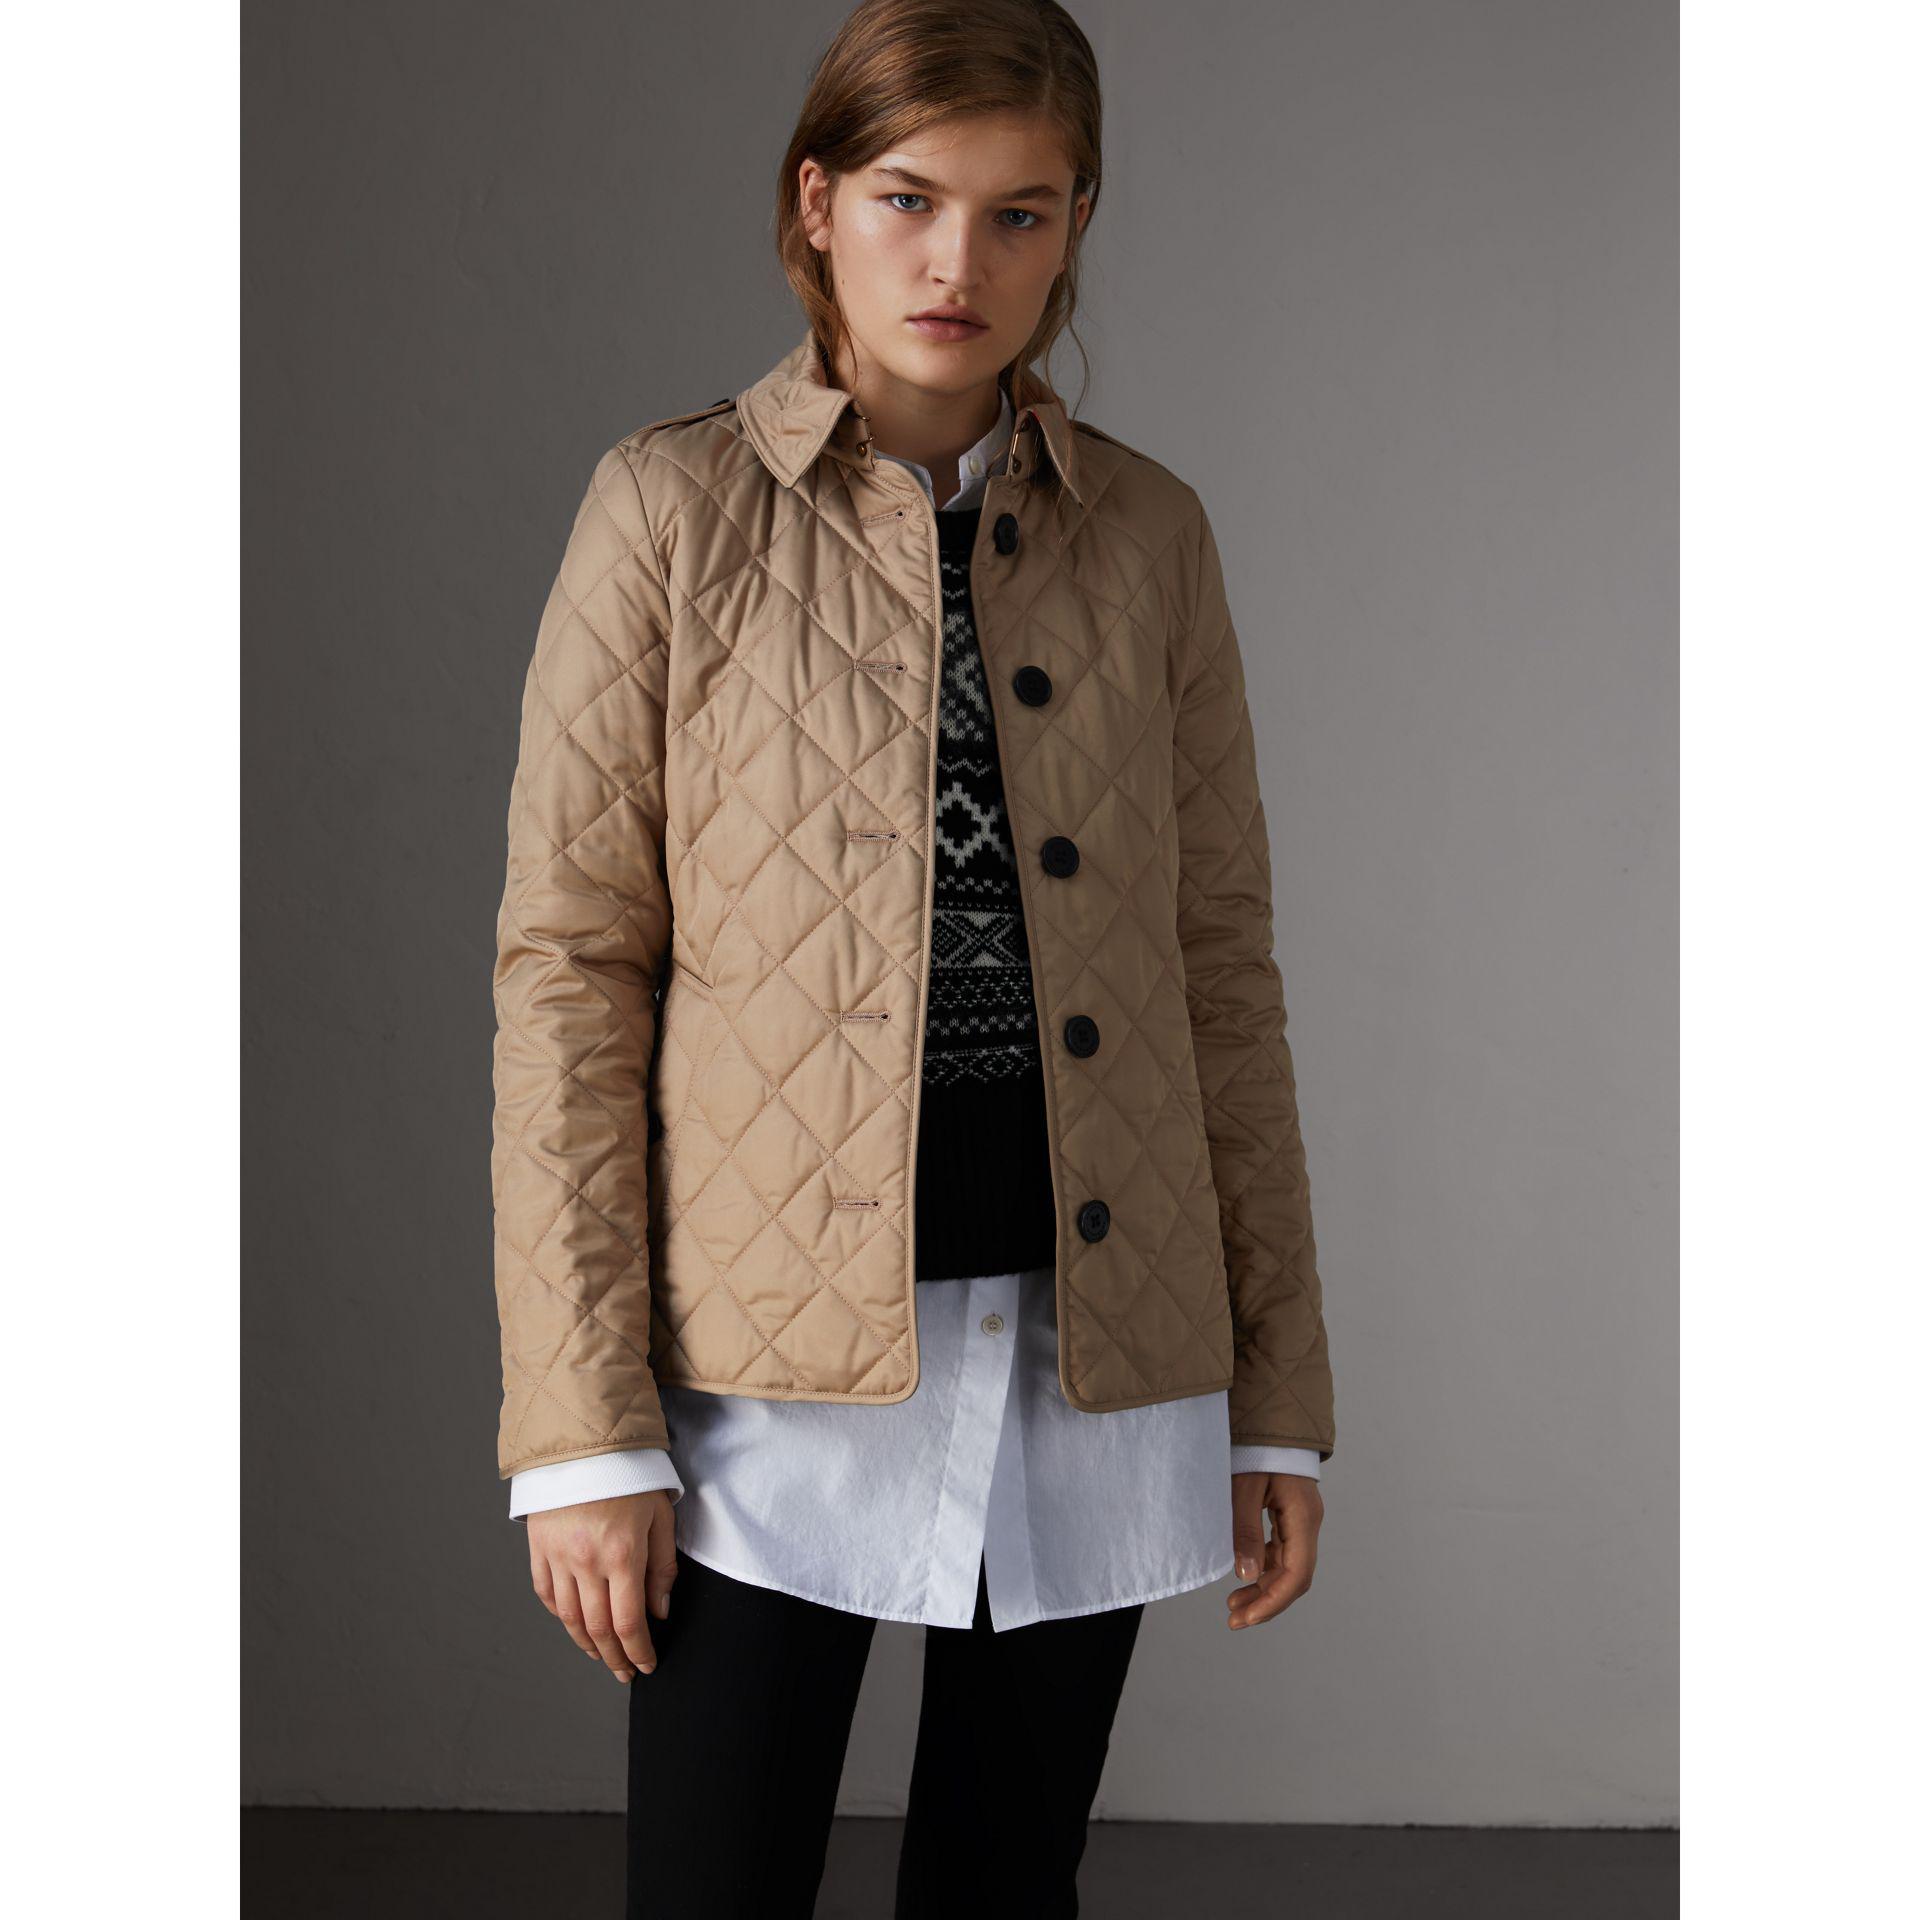 burberry frankby diamond quilted jacket